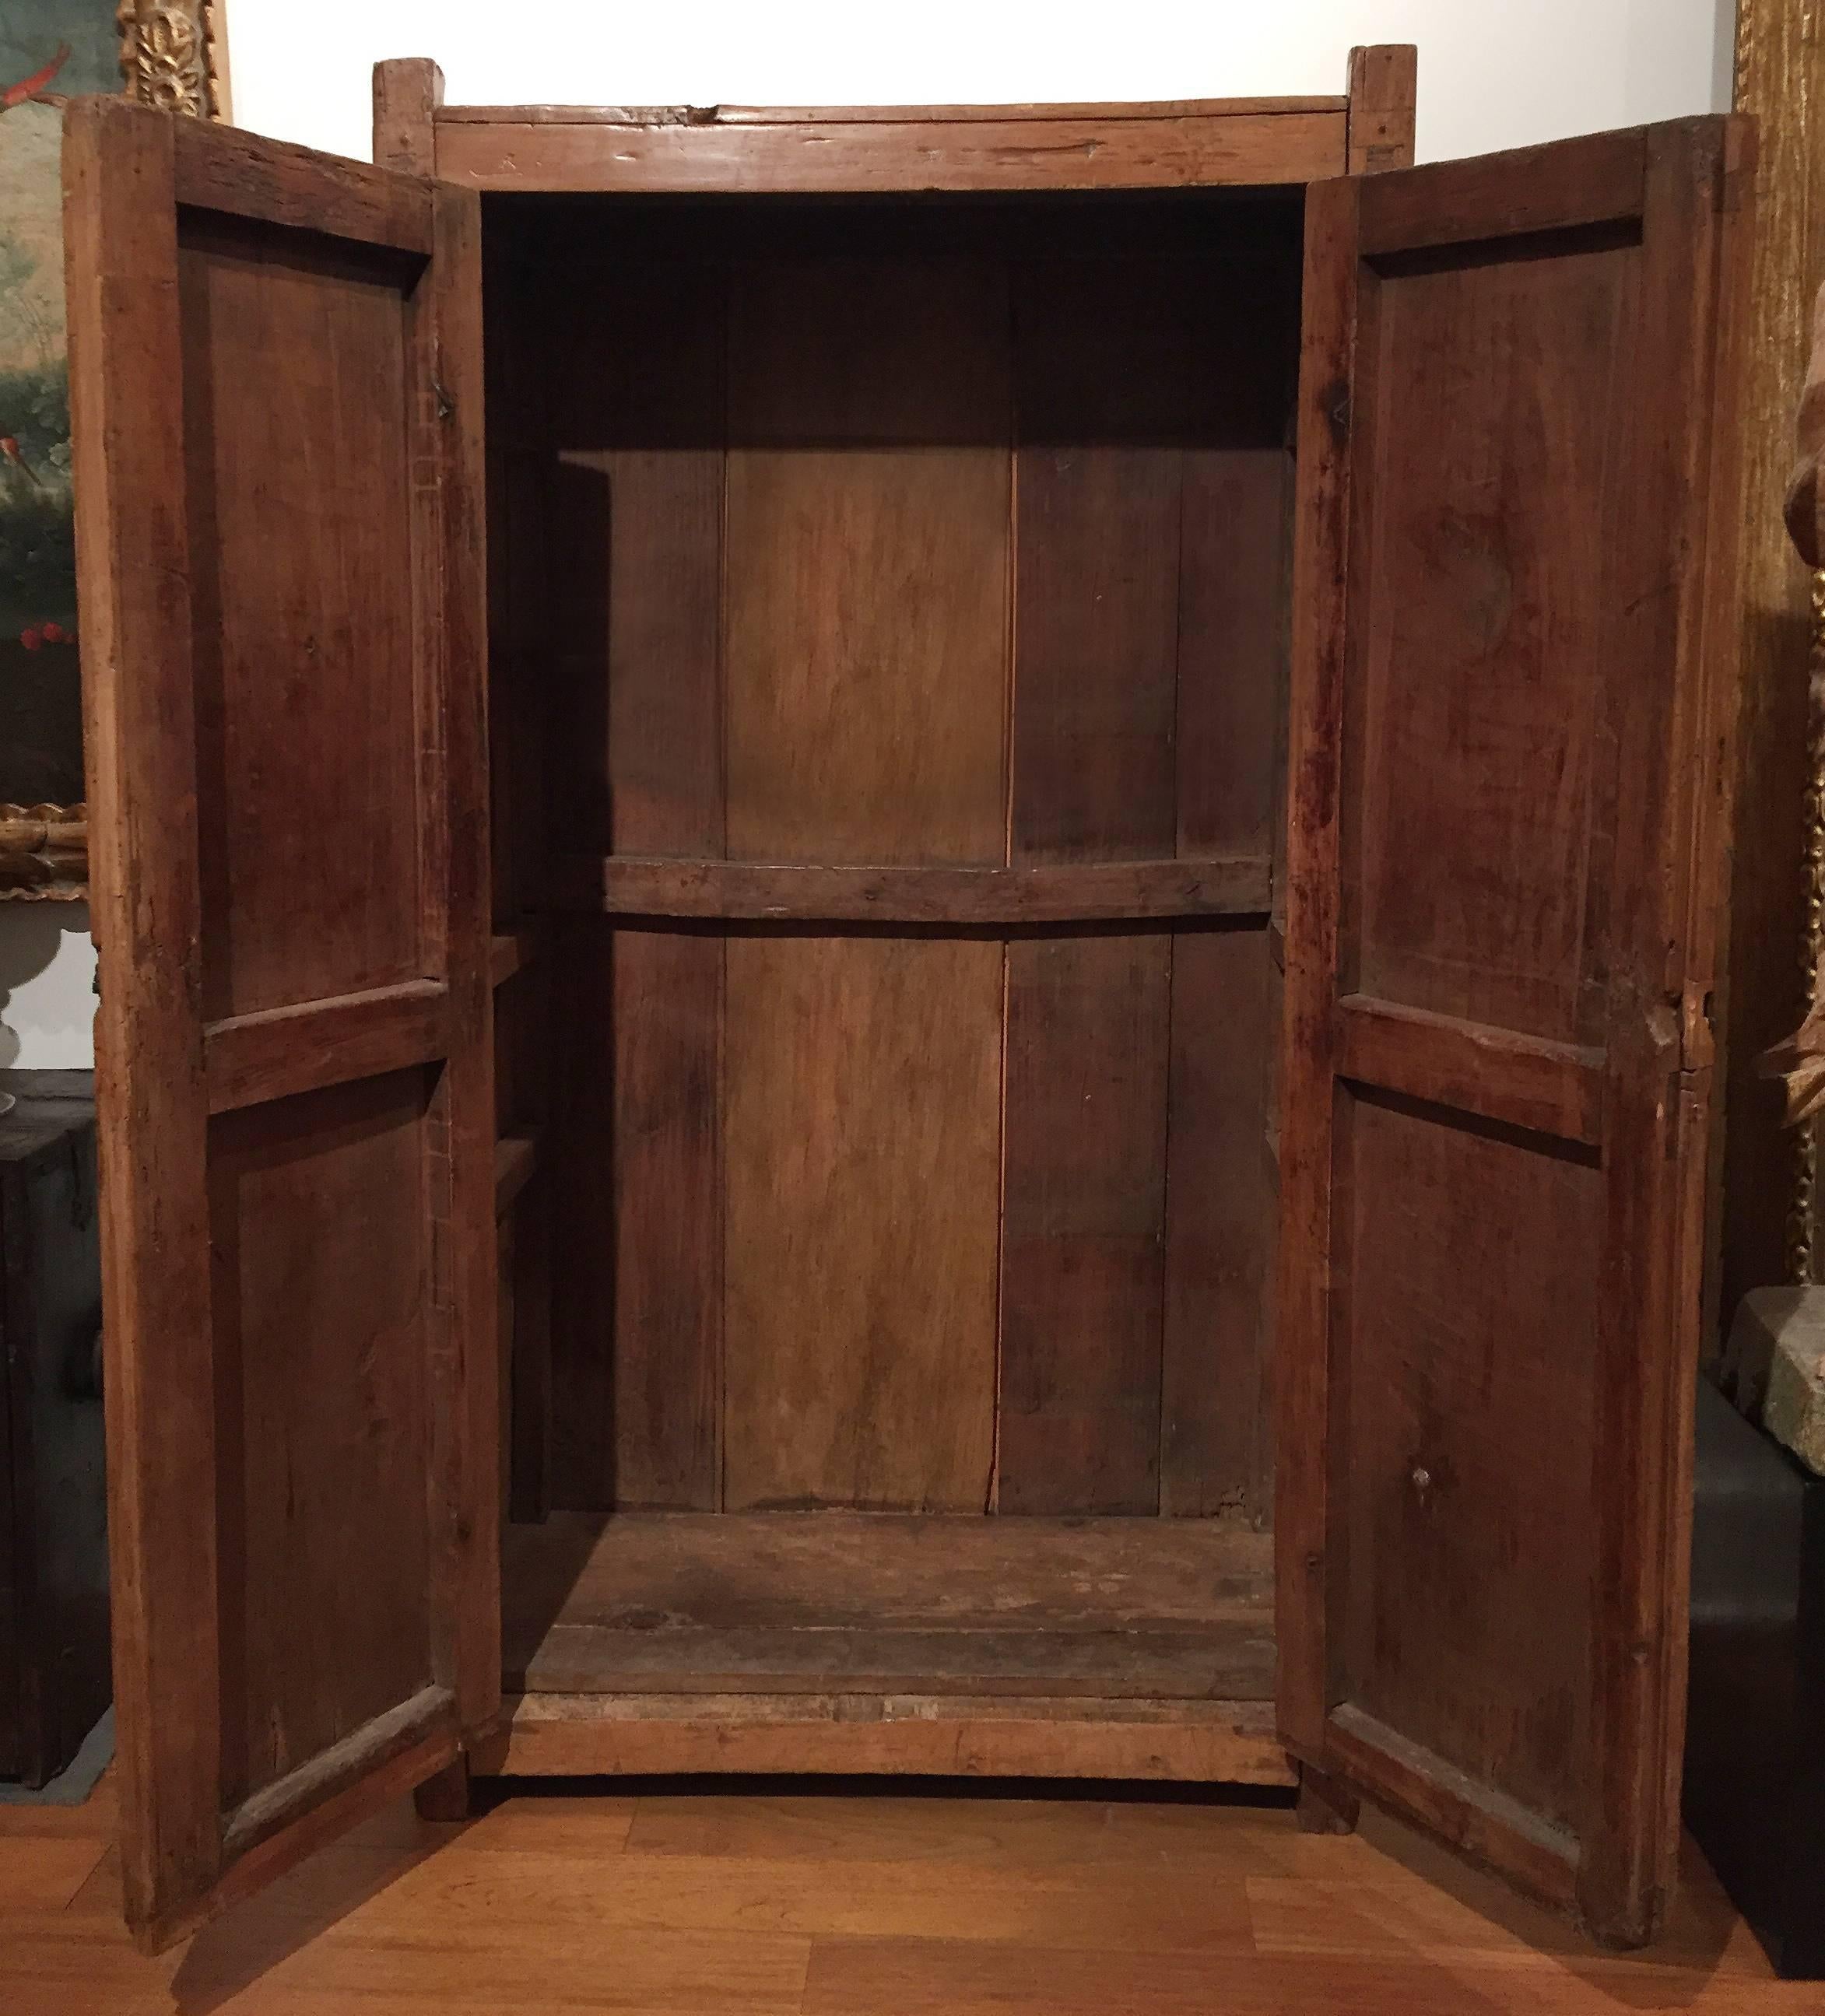 This 18th century Baroque armario o ropero (armoire or wardrobe) is constructed of hand hewn, joined and carved light sabino pine. The iron hinges, lock and lockplate are all hand-forged, as is an occasional nail that was used in antique repair. The